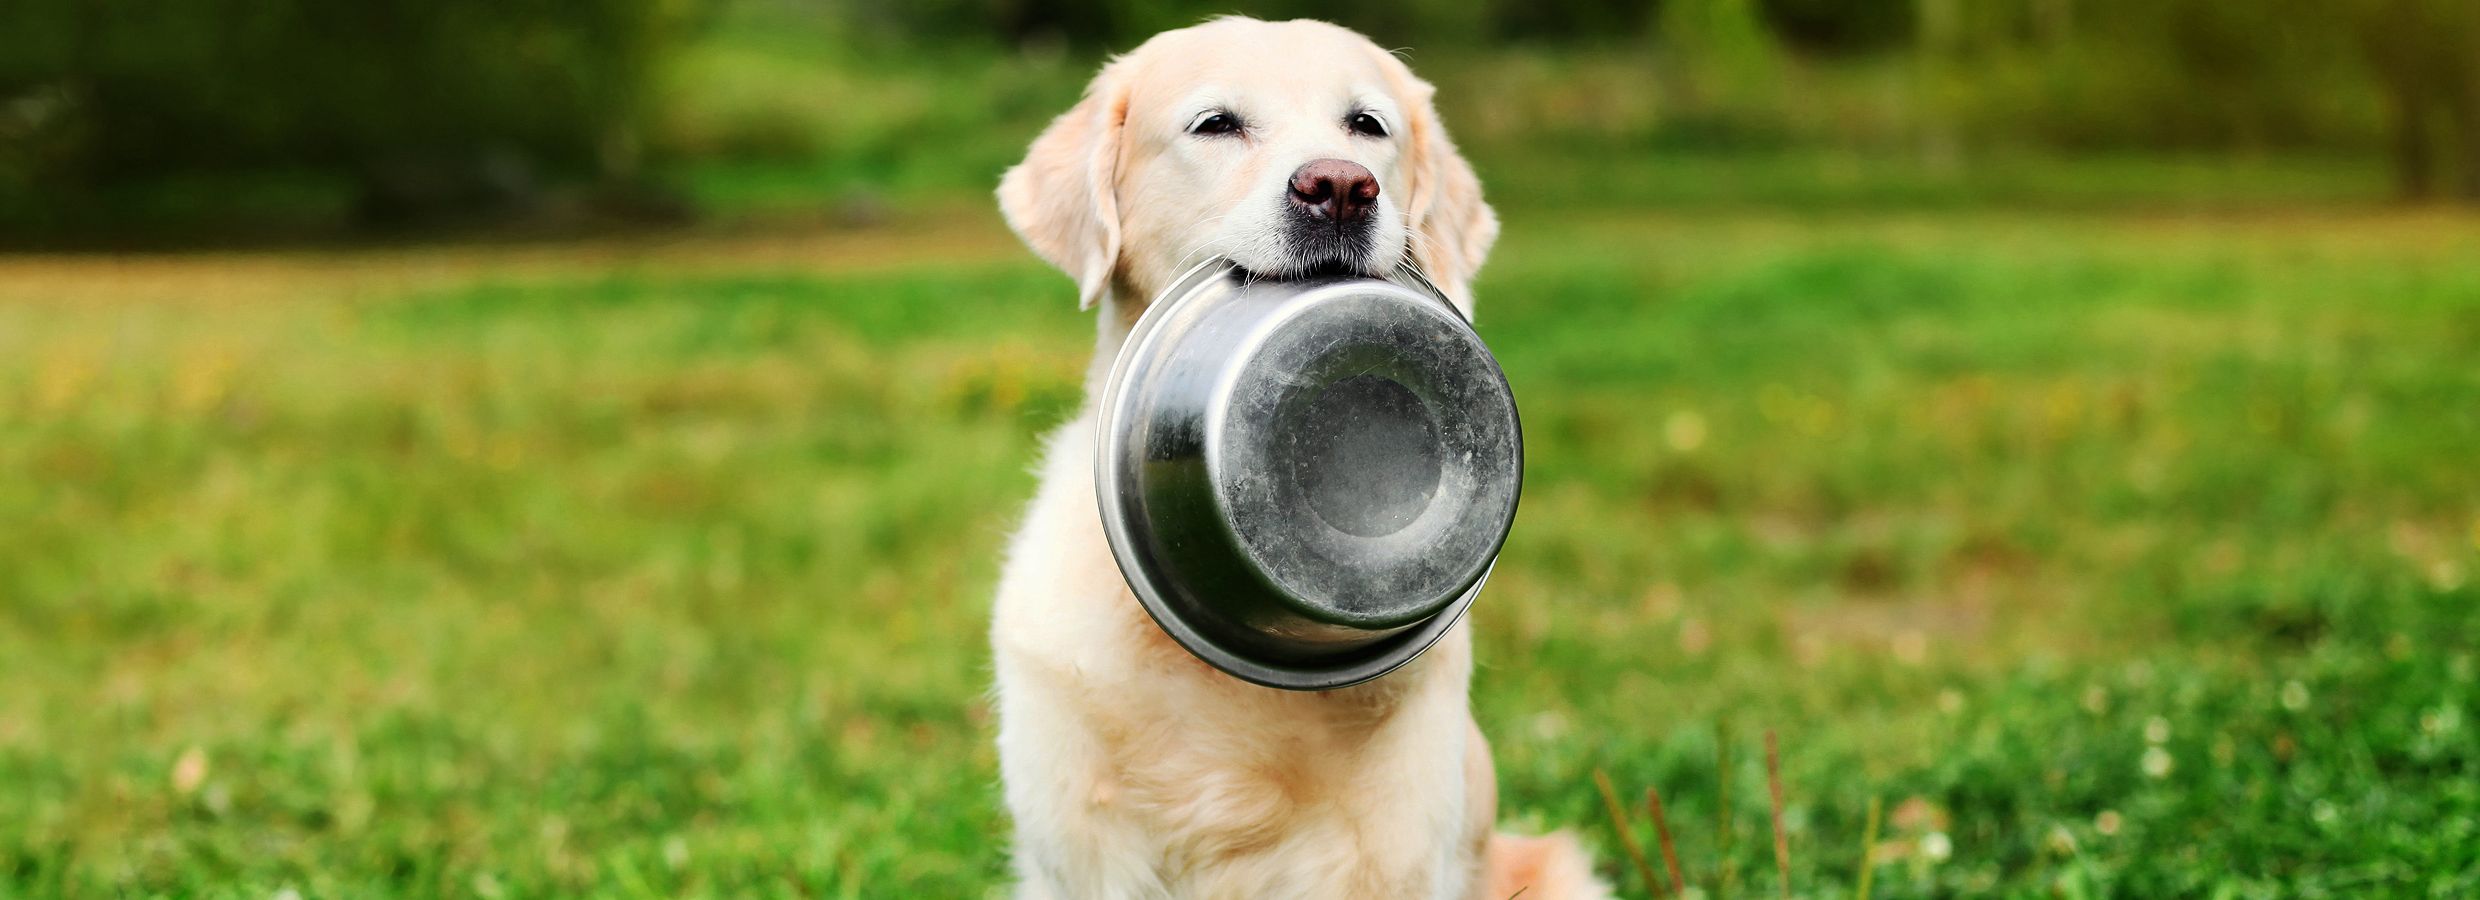 How to Choose the Right Dog Bowl | PetSmart